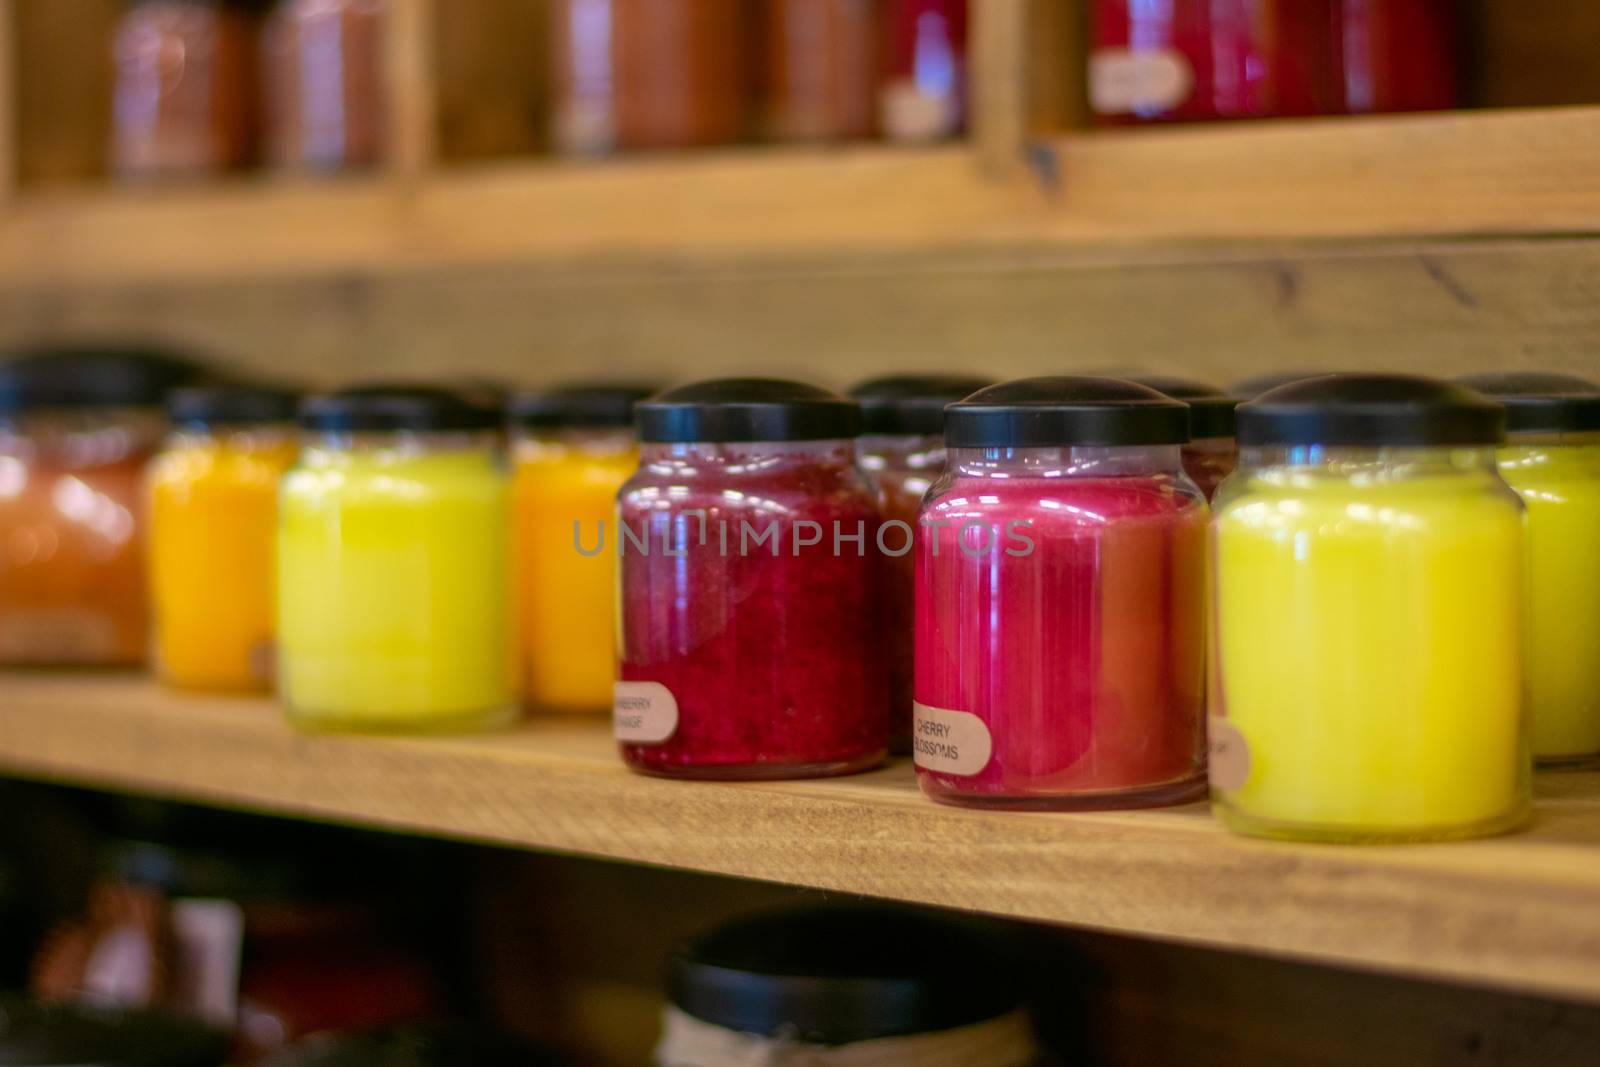 A Light Red Candle on a Shelf Full of Candles in a Farmer's Market